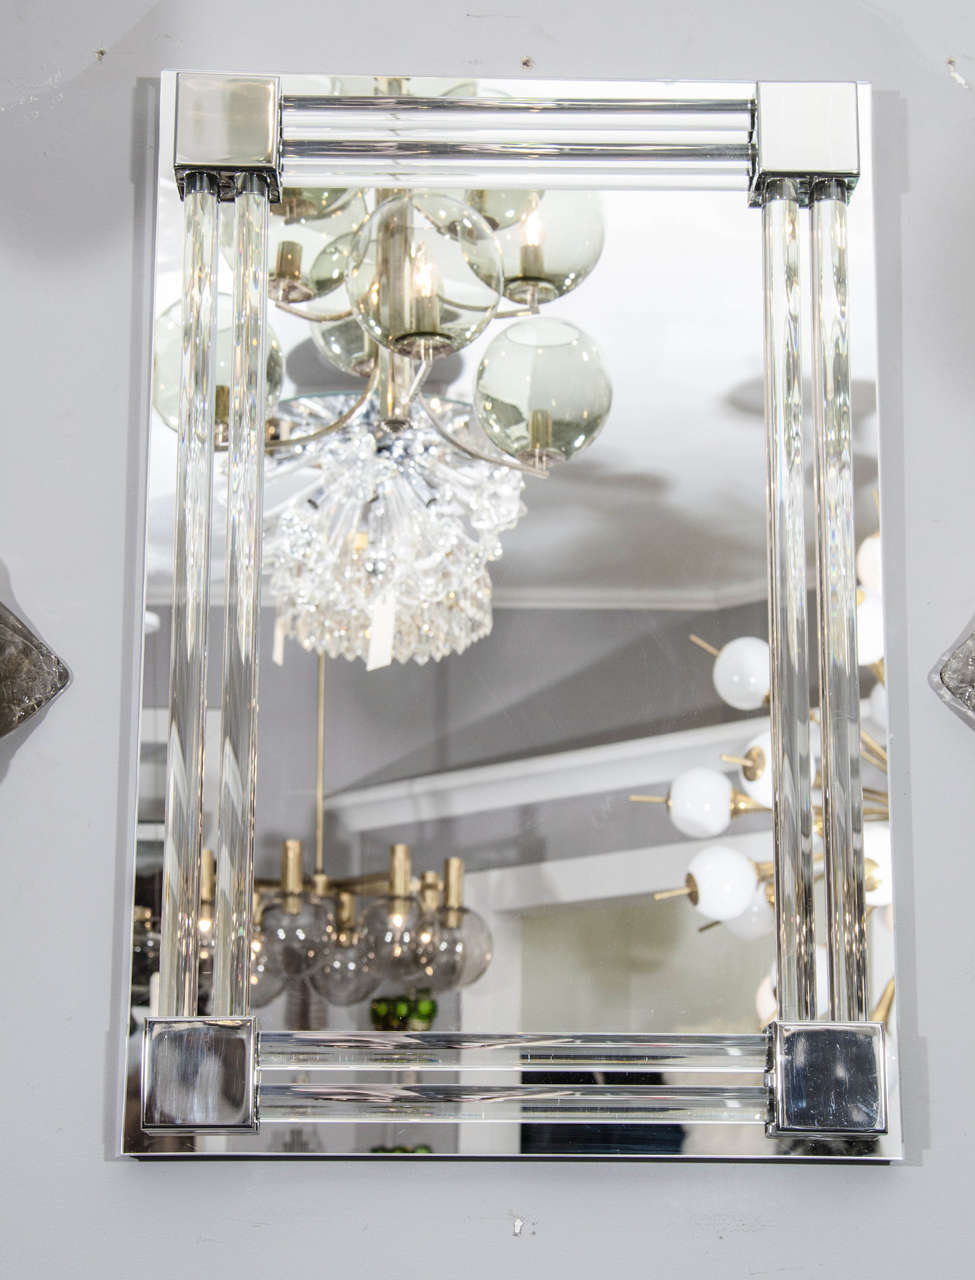 Made to order and customized to your specifications this stylish and chic mirror is framed in polished nickel with raised corner details connecting a surrounding double row of solid glass rods. 

Material and finish options are available. Please